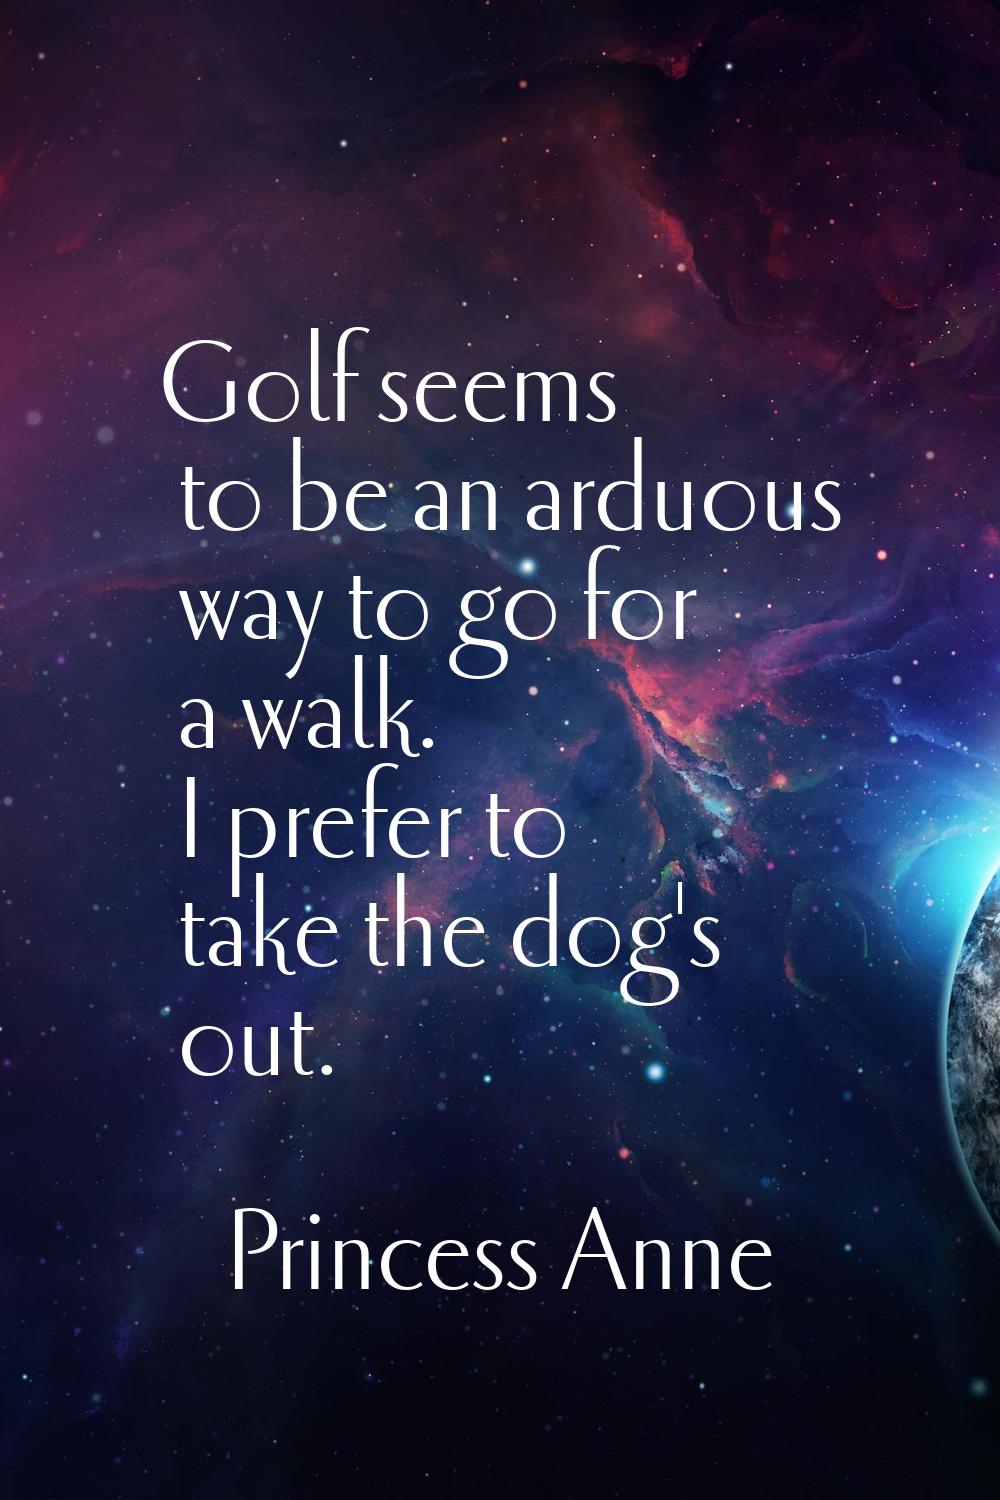 Golf seems to be an arduous way to go for a walk. I prefer to take the dog's out.